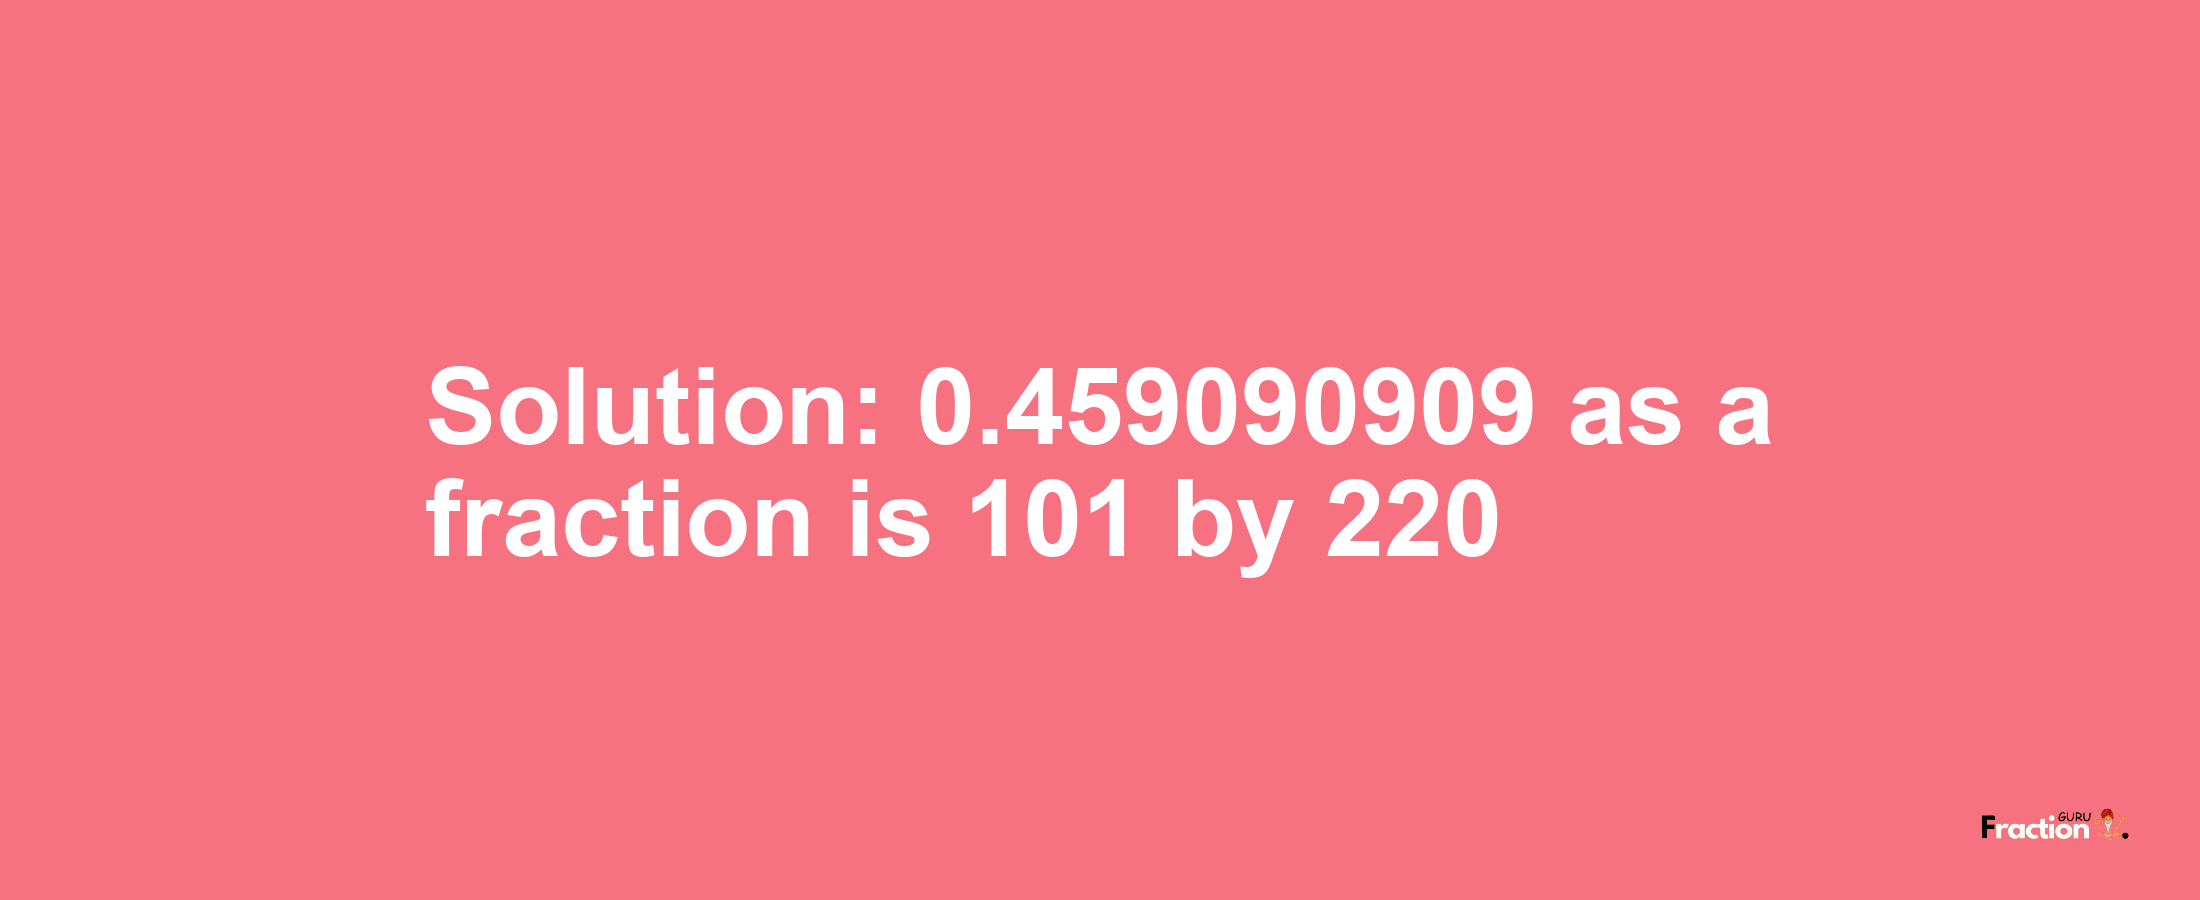 Solution:0.459090909 as a fraction is 101/220